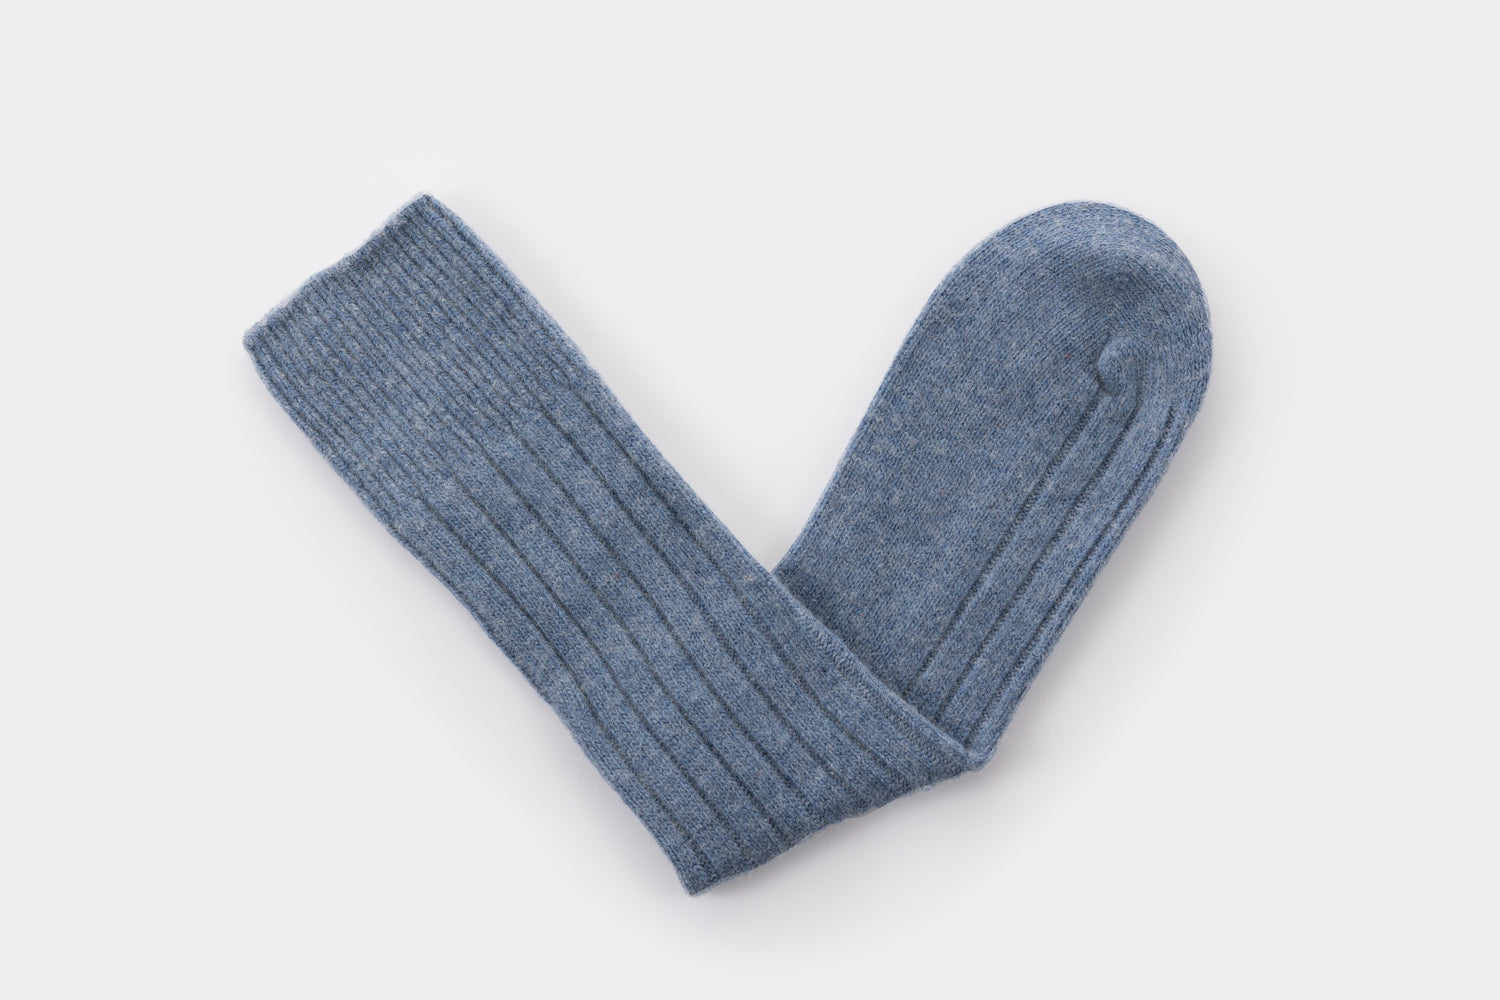 Blue and Cream Lambswool Bed Sock Collection